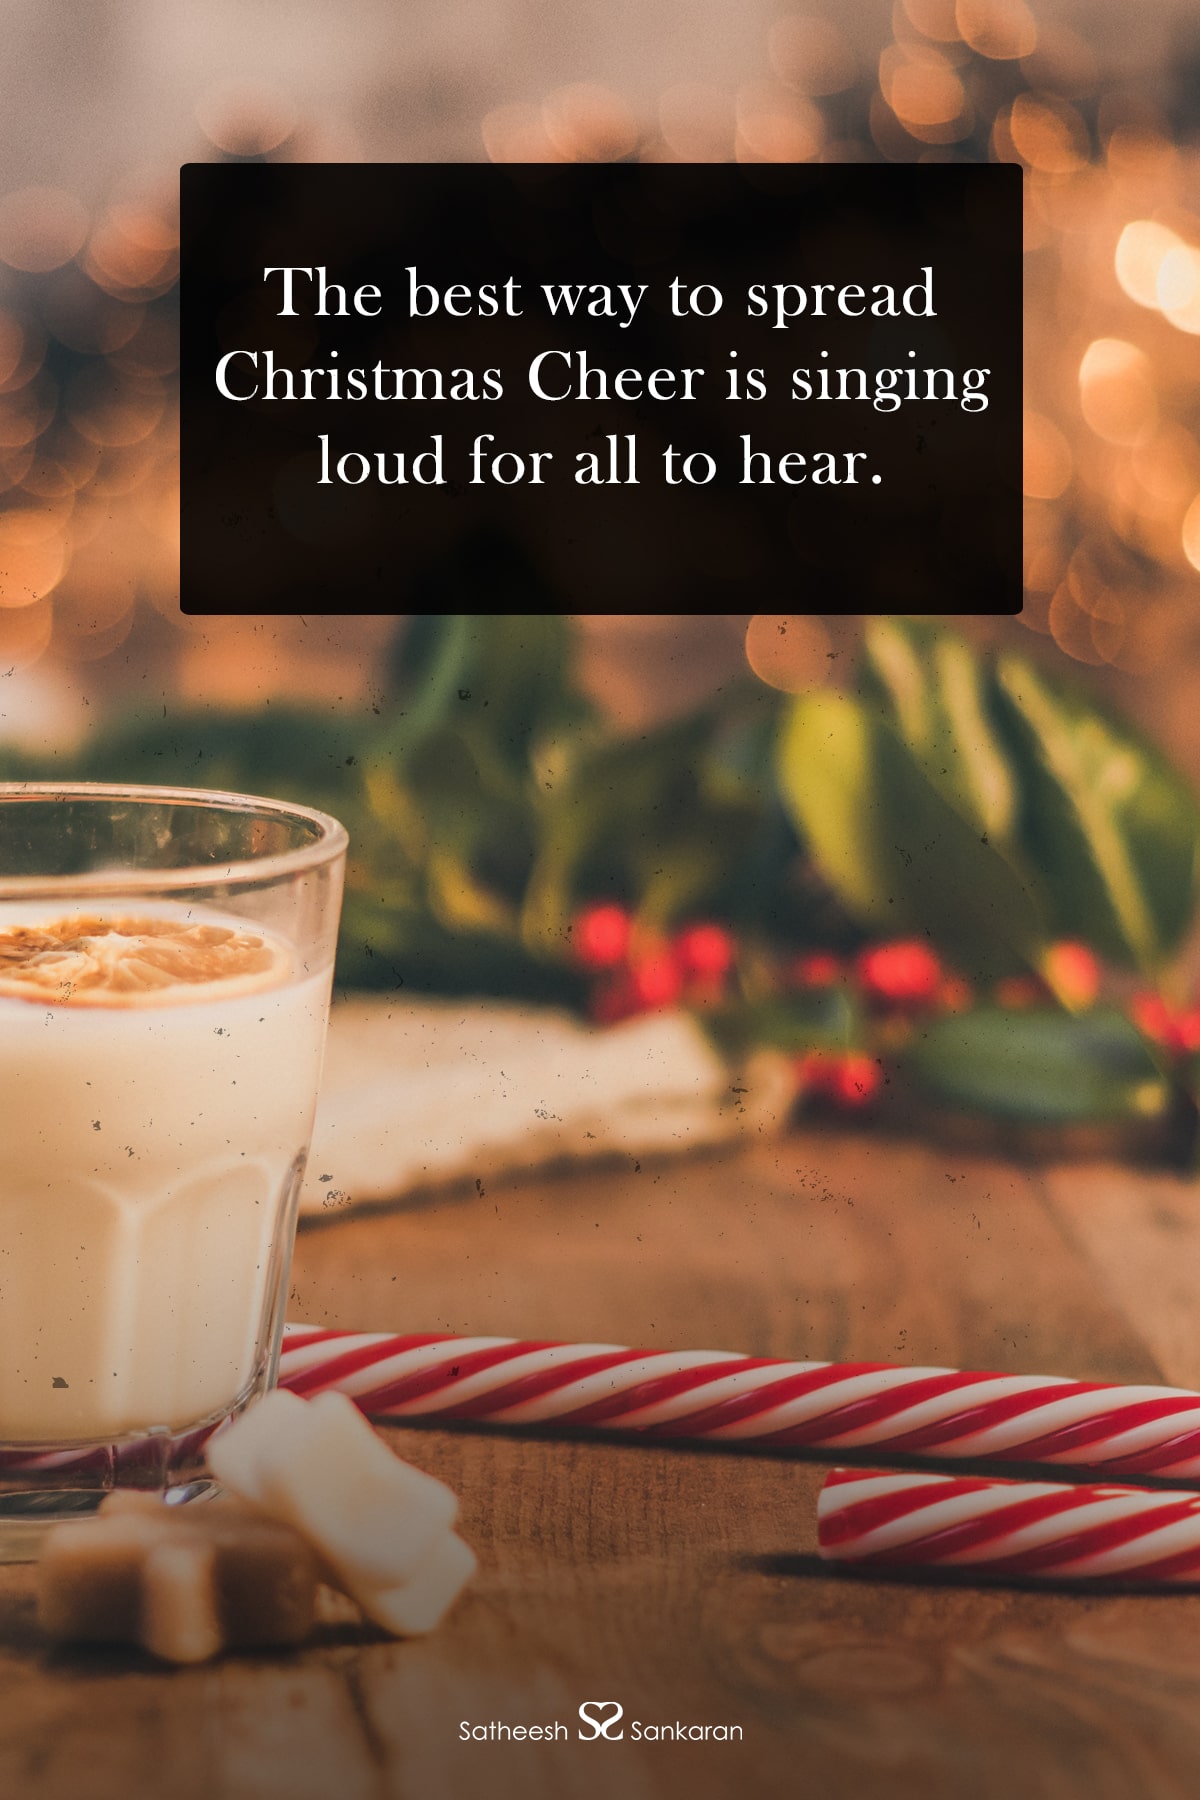 The best way to spread Christmas Cheer is singing loud for all to hear.